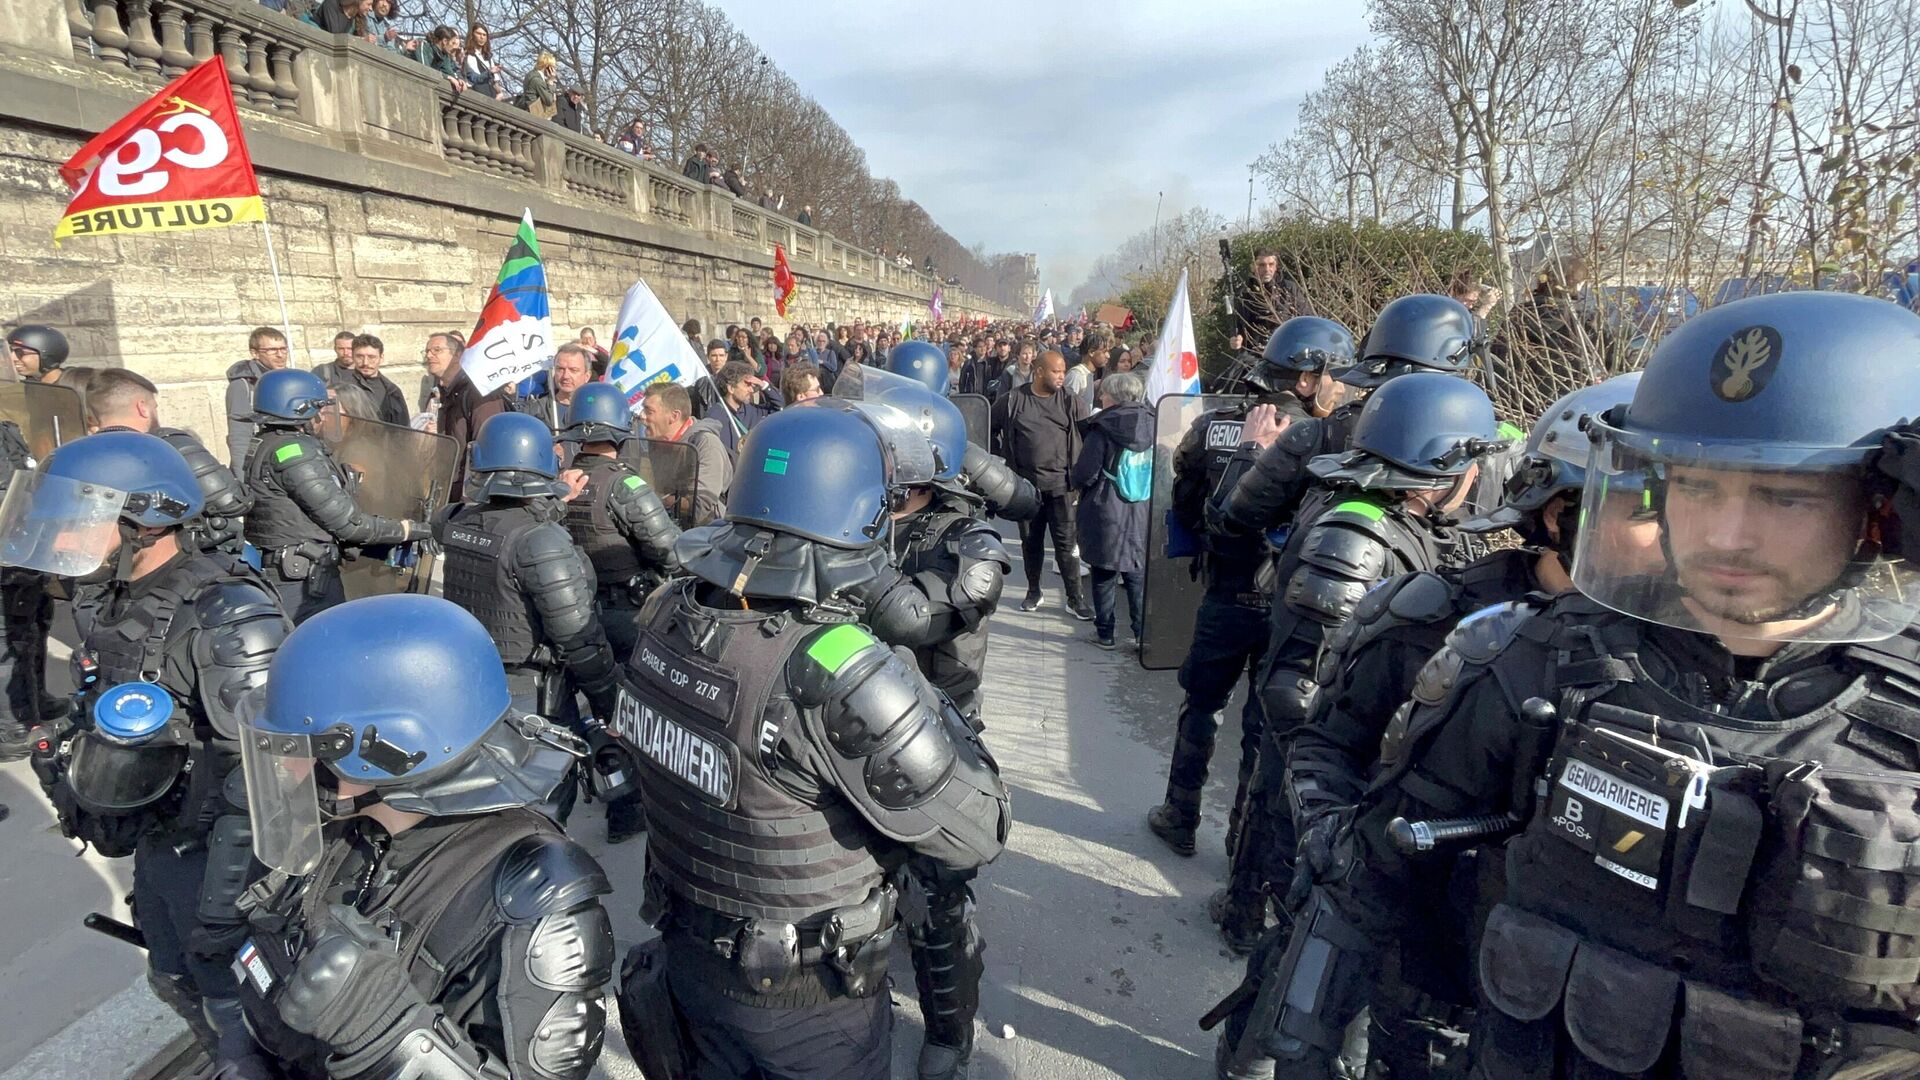 Police officers protest pension reform on one of the streets of Paris - RIA Novosti, 1920, 23.03.2023